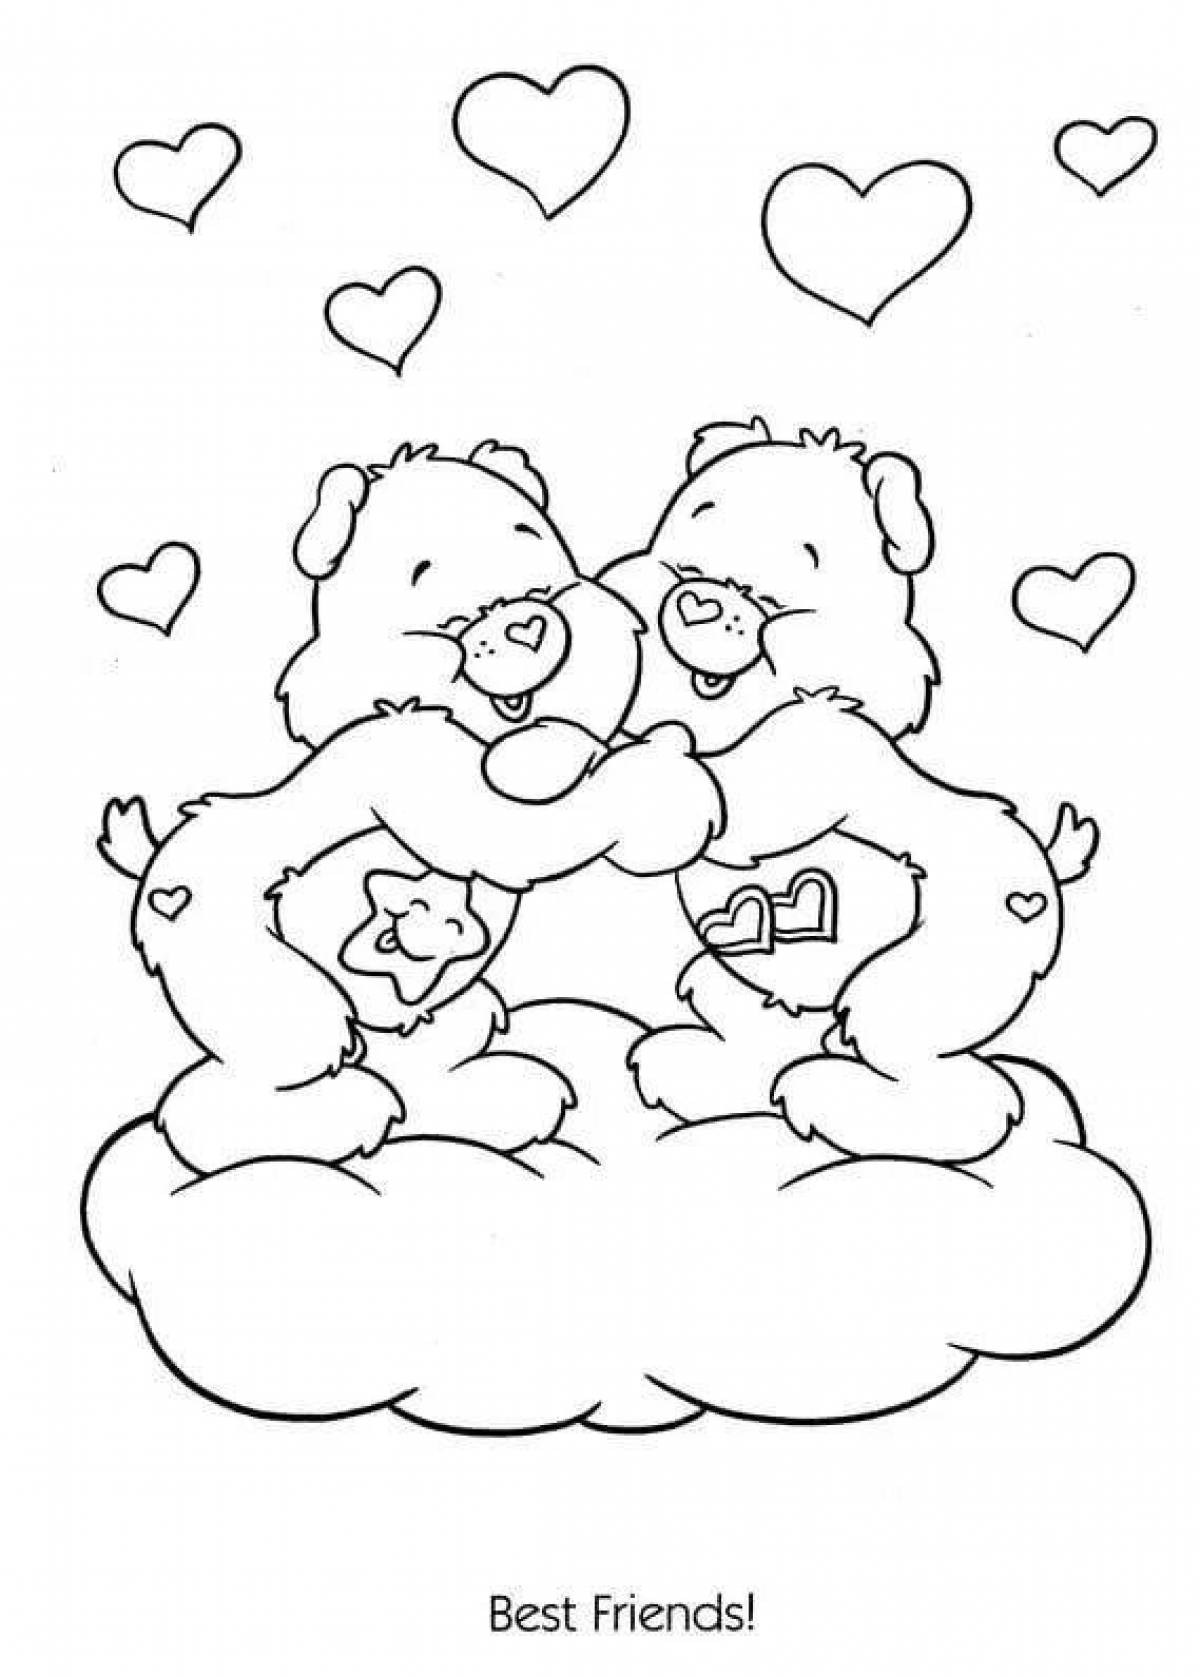 Coloring book kind teddy bear with a heart